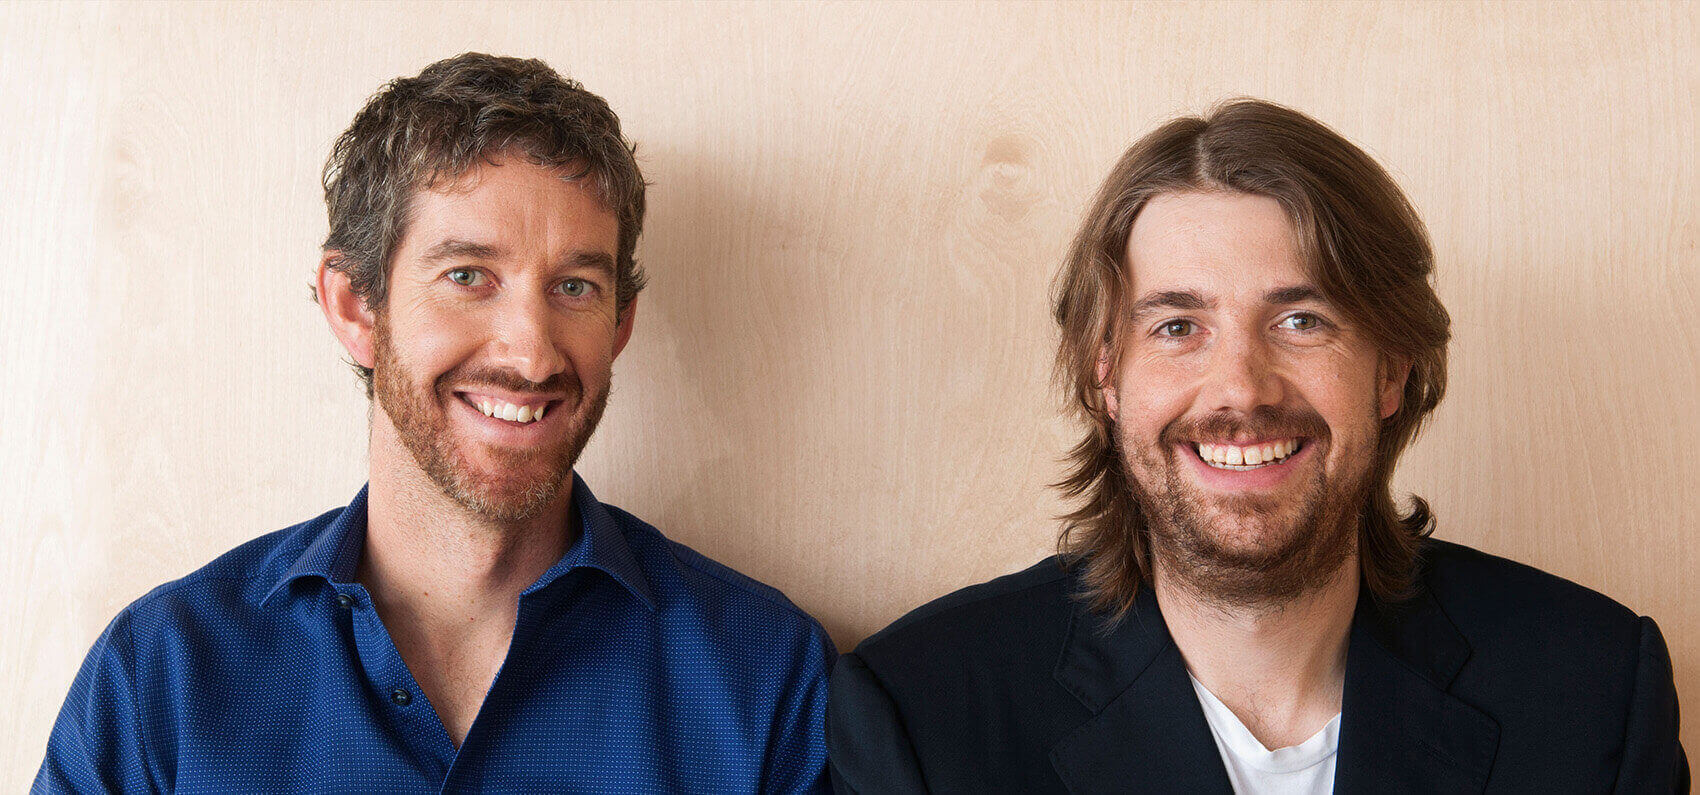 Scott Farquhar and Mike Cannon-Brookes, CEOs of Atlassian